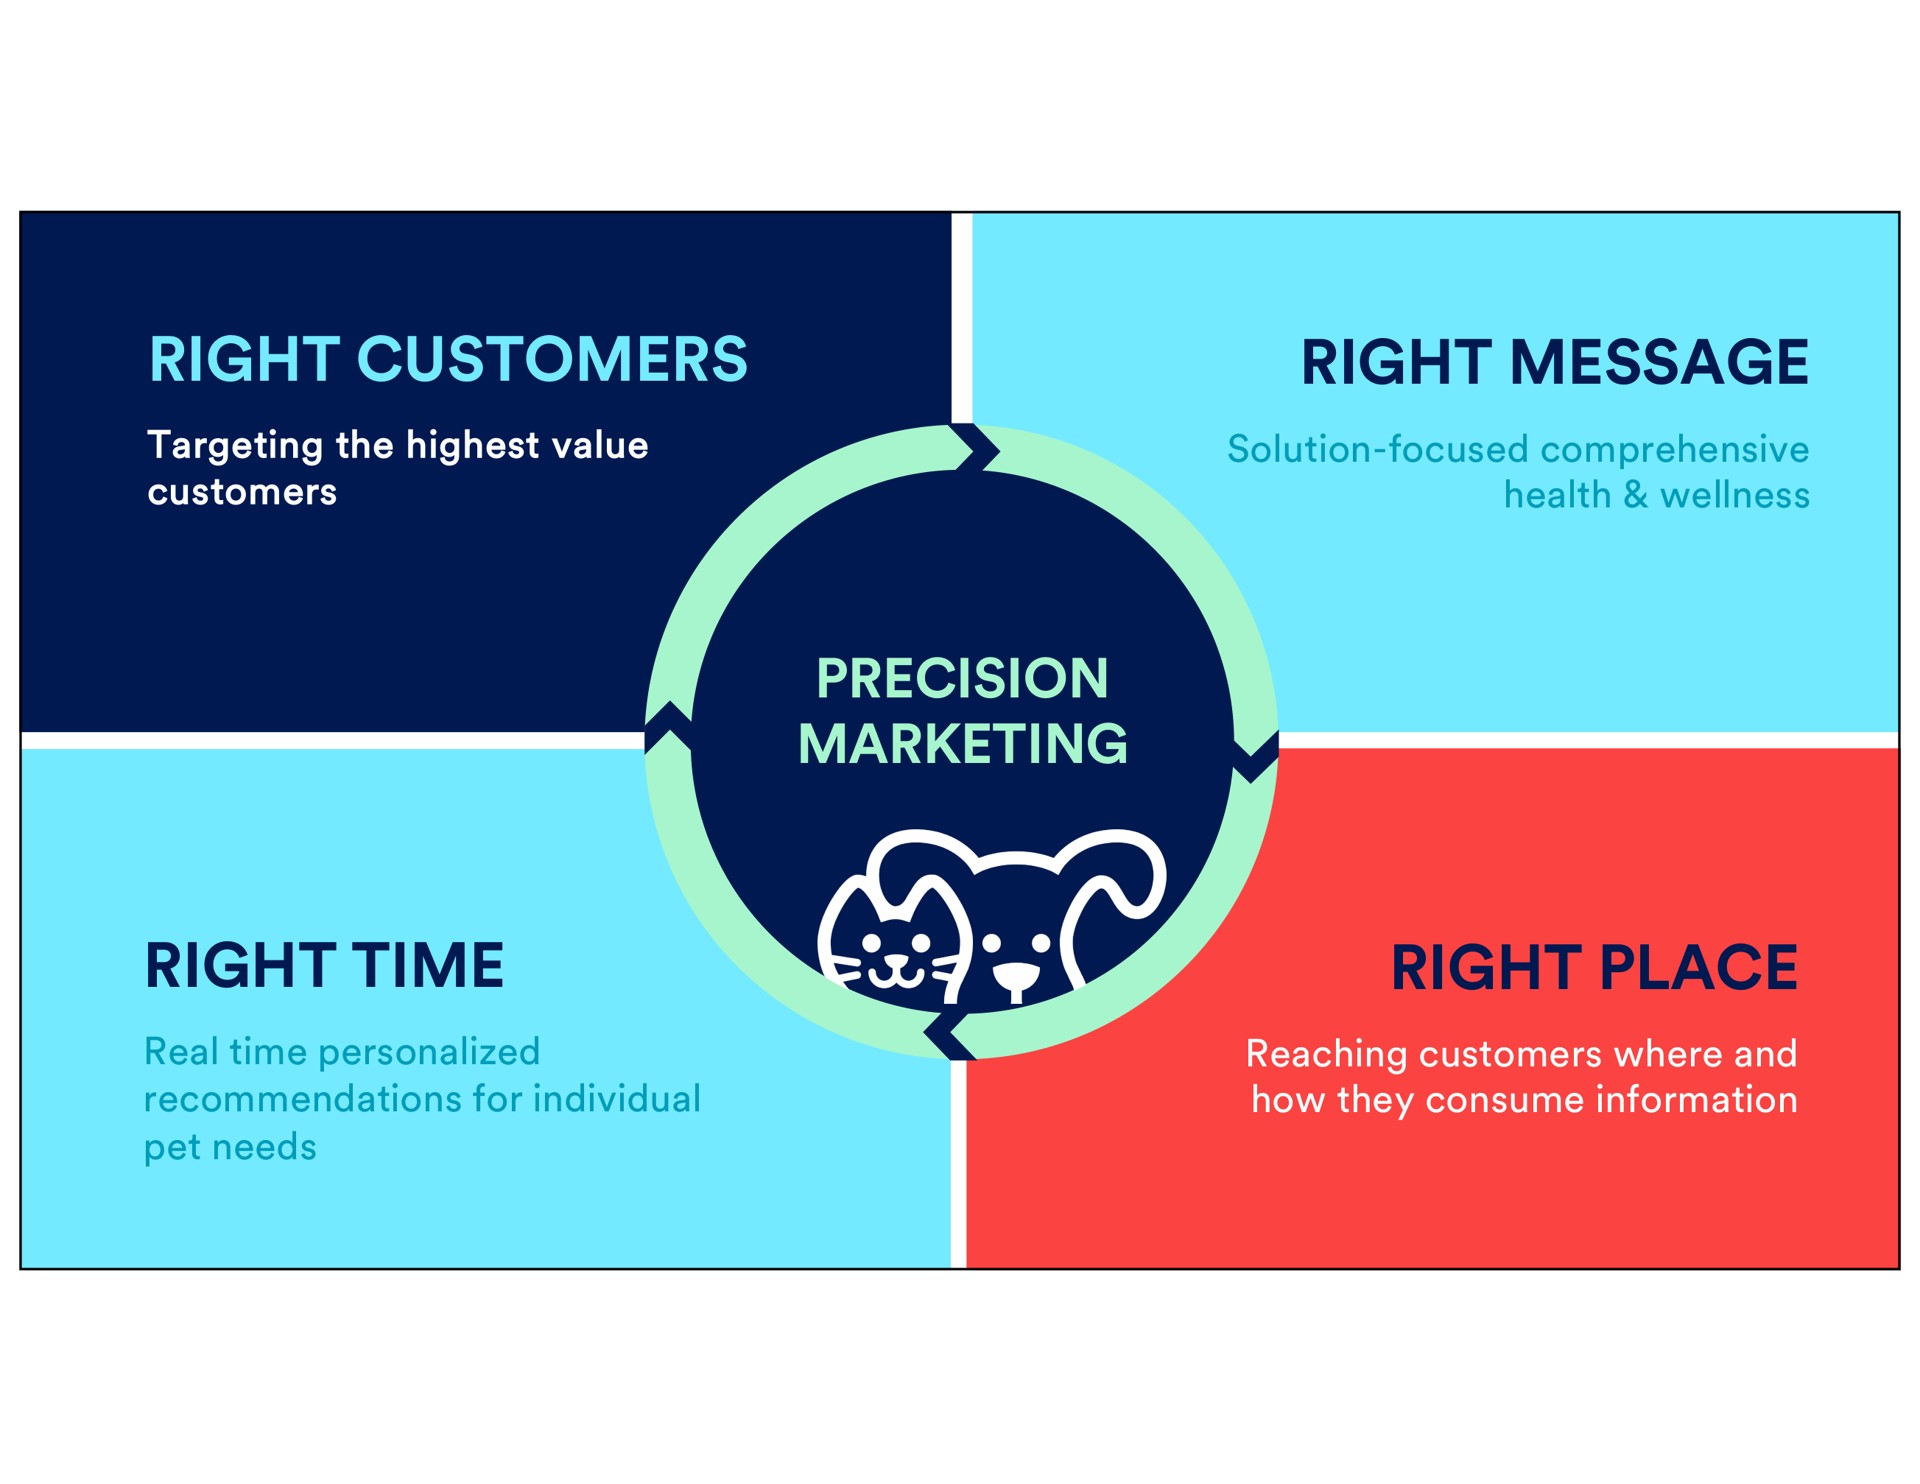 right customers right message precision marketing right time right place right place targeting the highest value solution focused comprehensive health wellness pet needs real personalized recommendations for individual reaching where and how they consume information | Petco